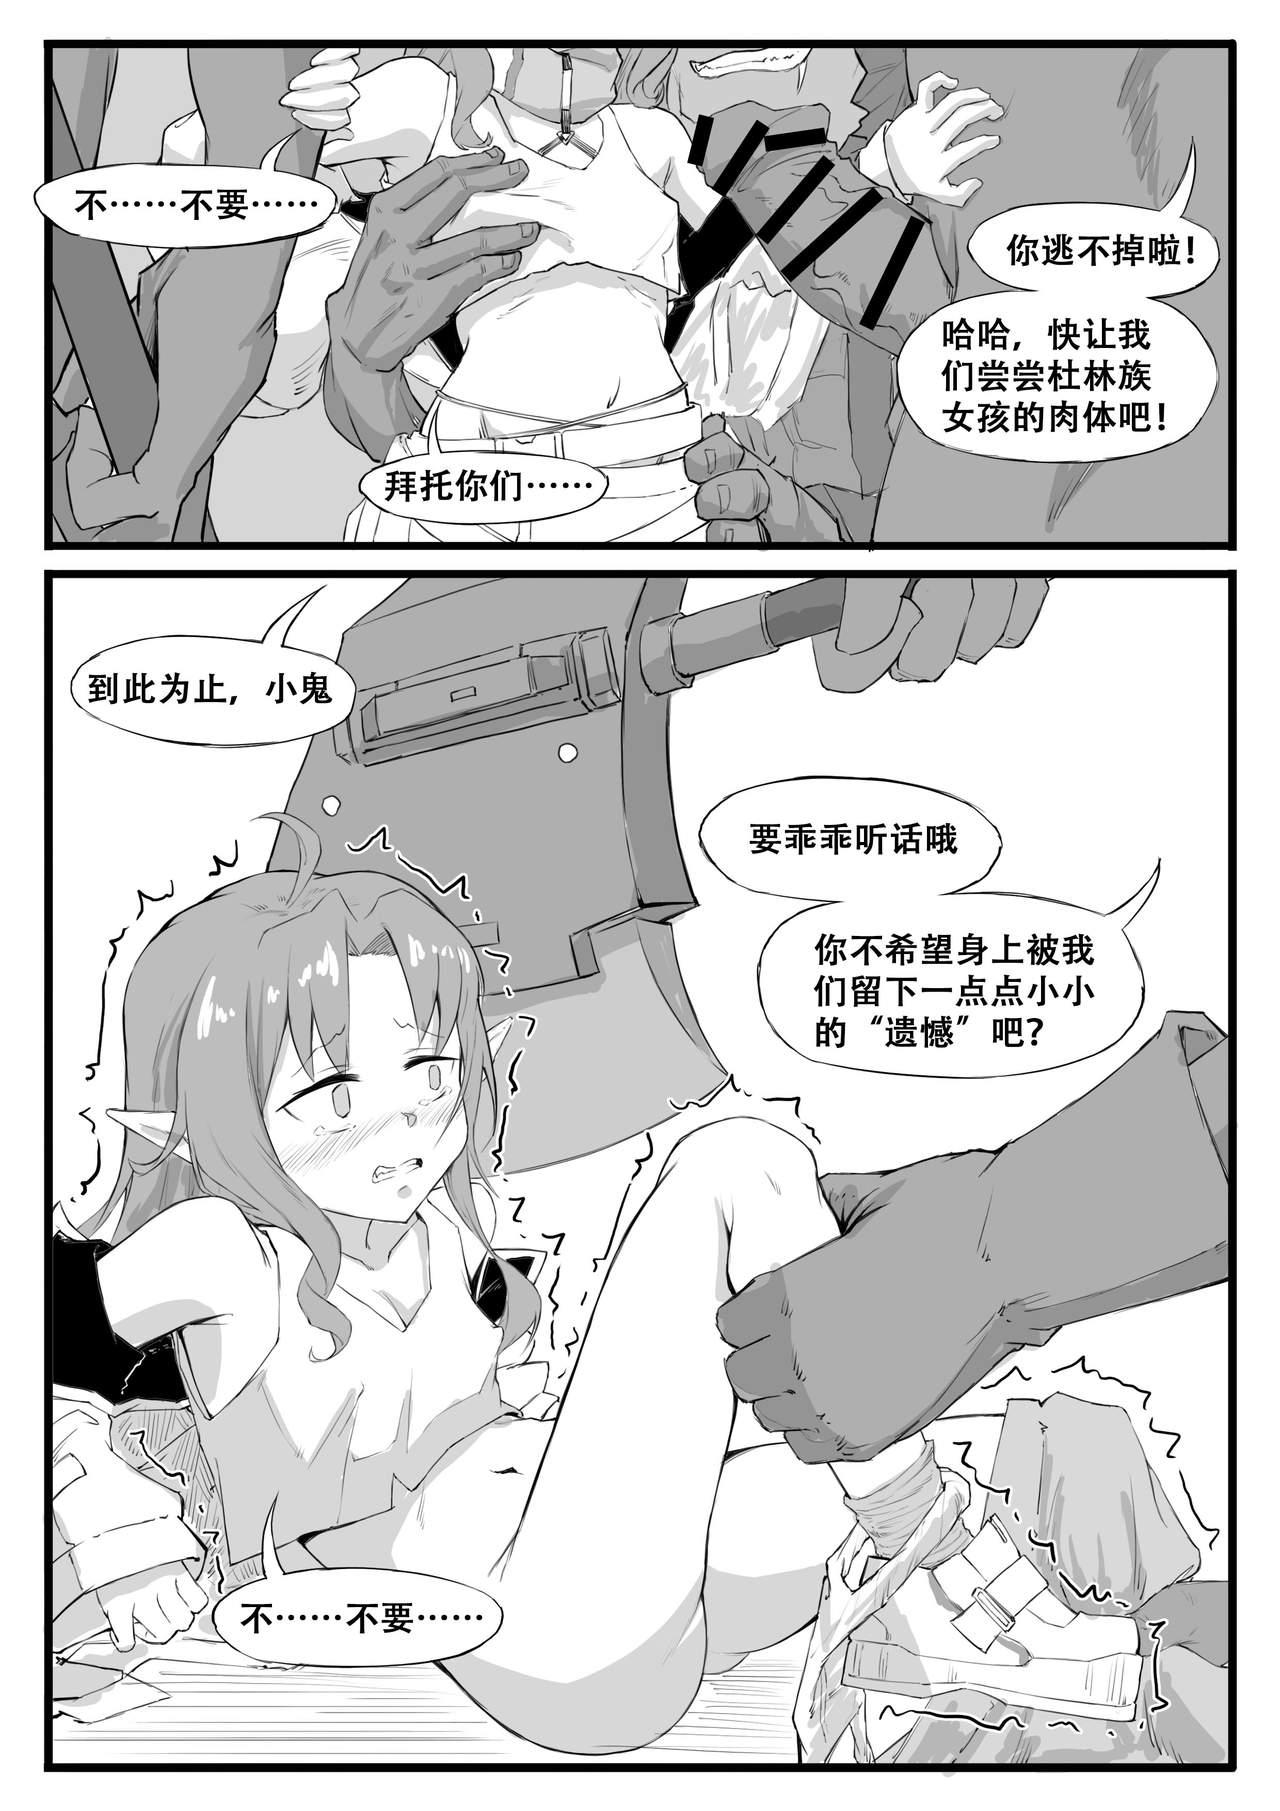 Girlongirl 最强先锋桃金娘 - Arknights Real Amateur - Page 6